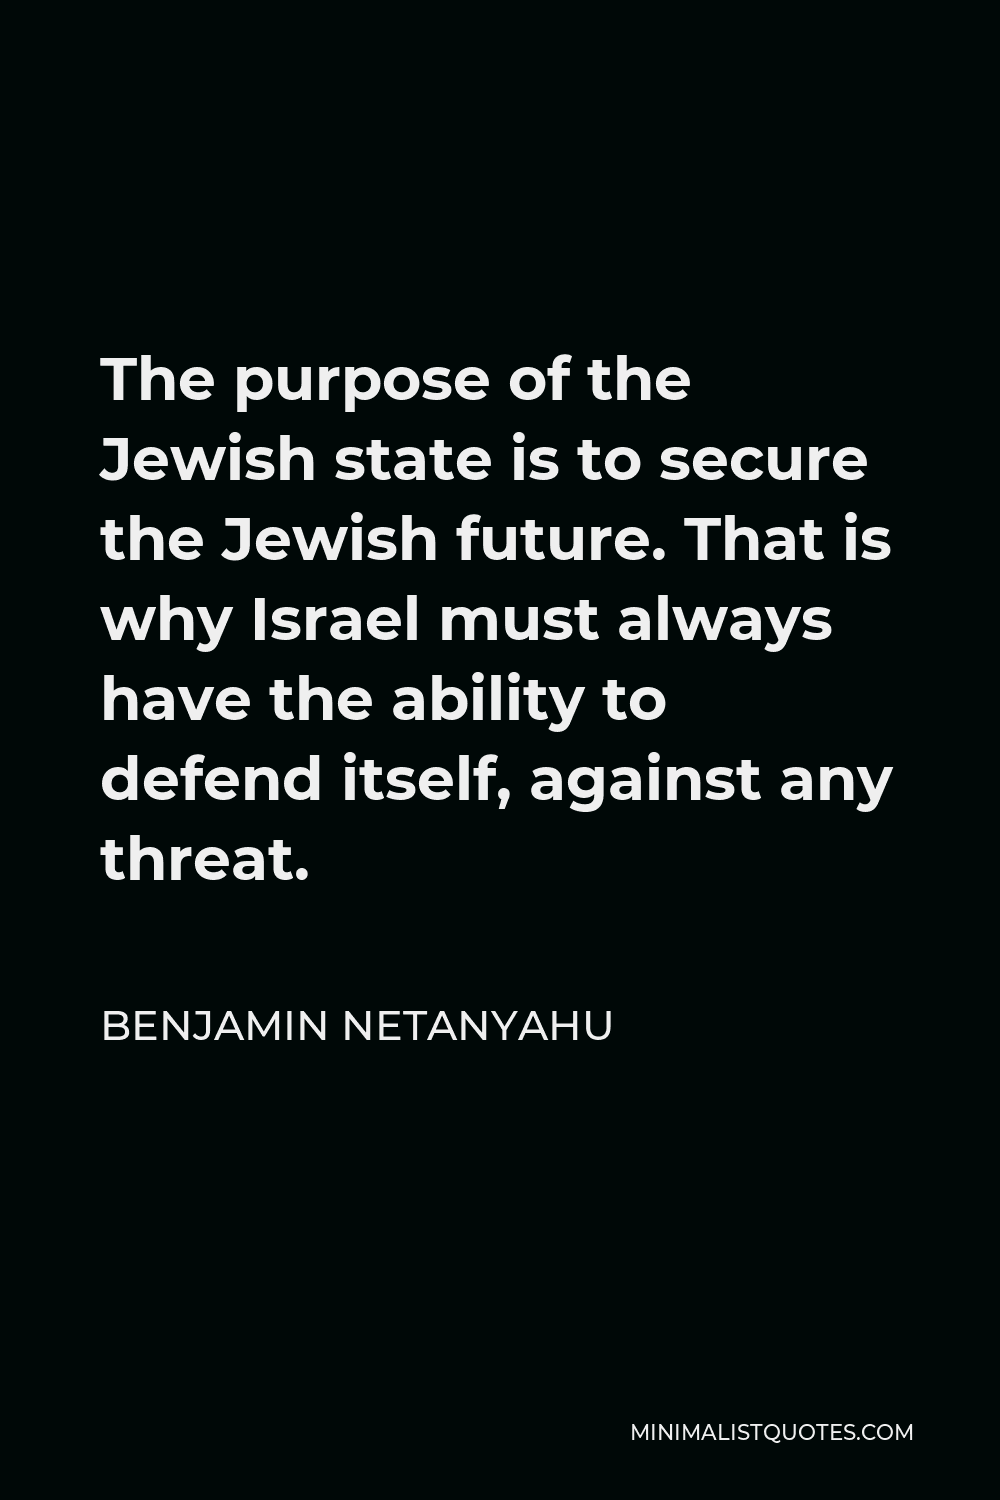 Benjamin Netanyahu Quote - The purpose of the Jewish state is to secure the Jewish future. That is why Israel must always have the ability to defend itself, against any threat.